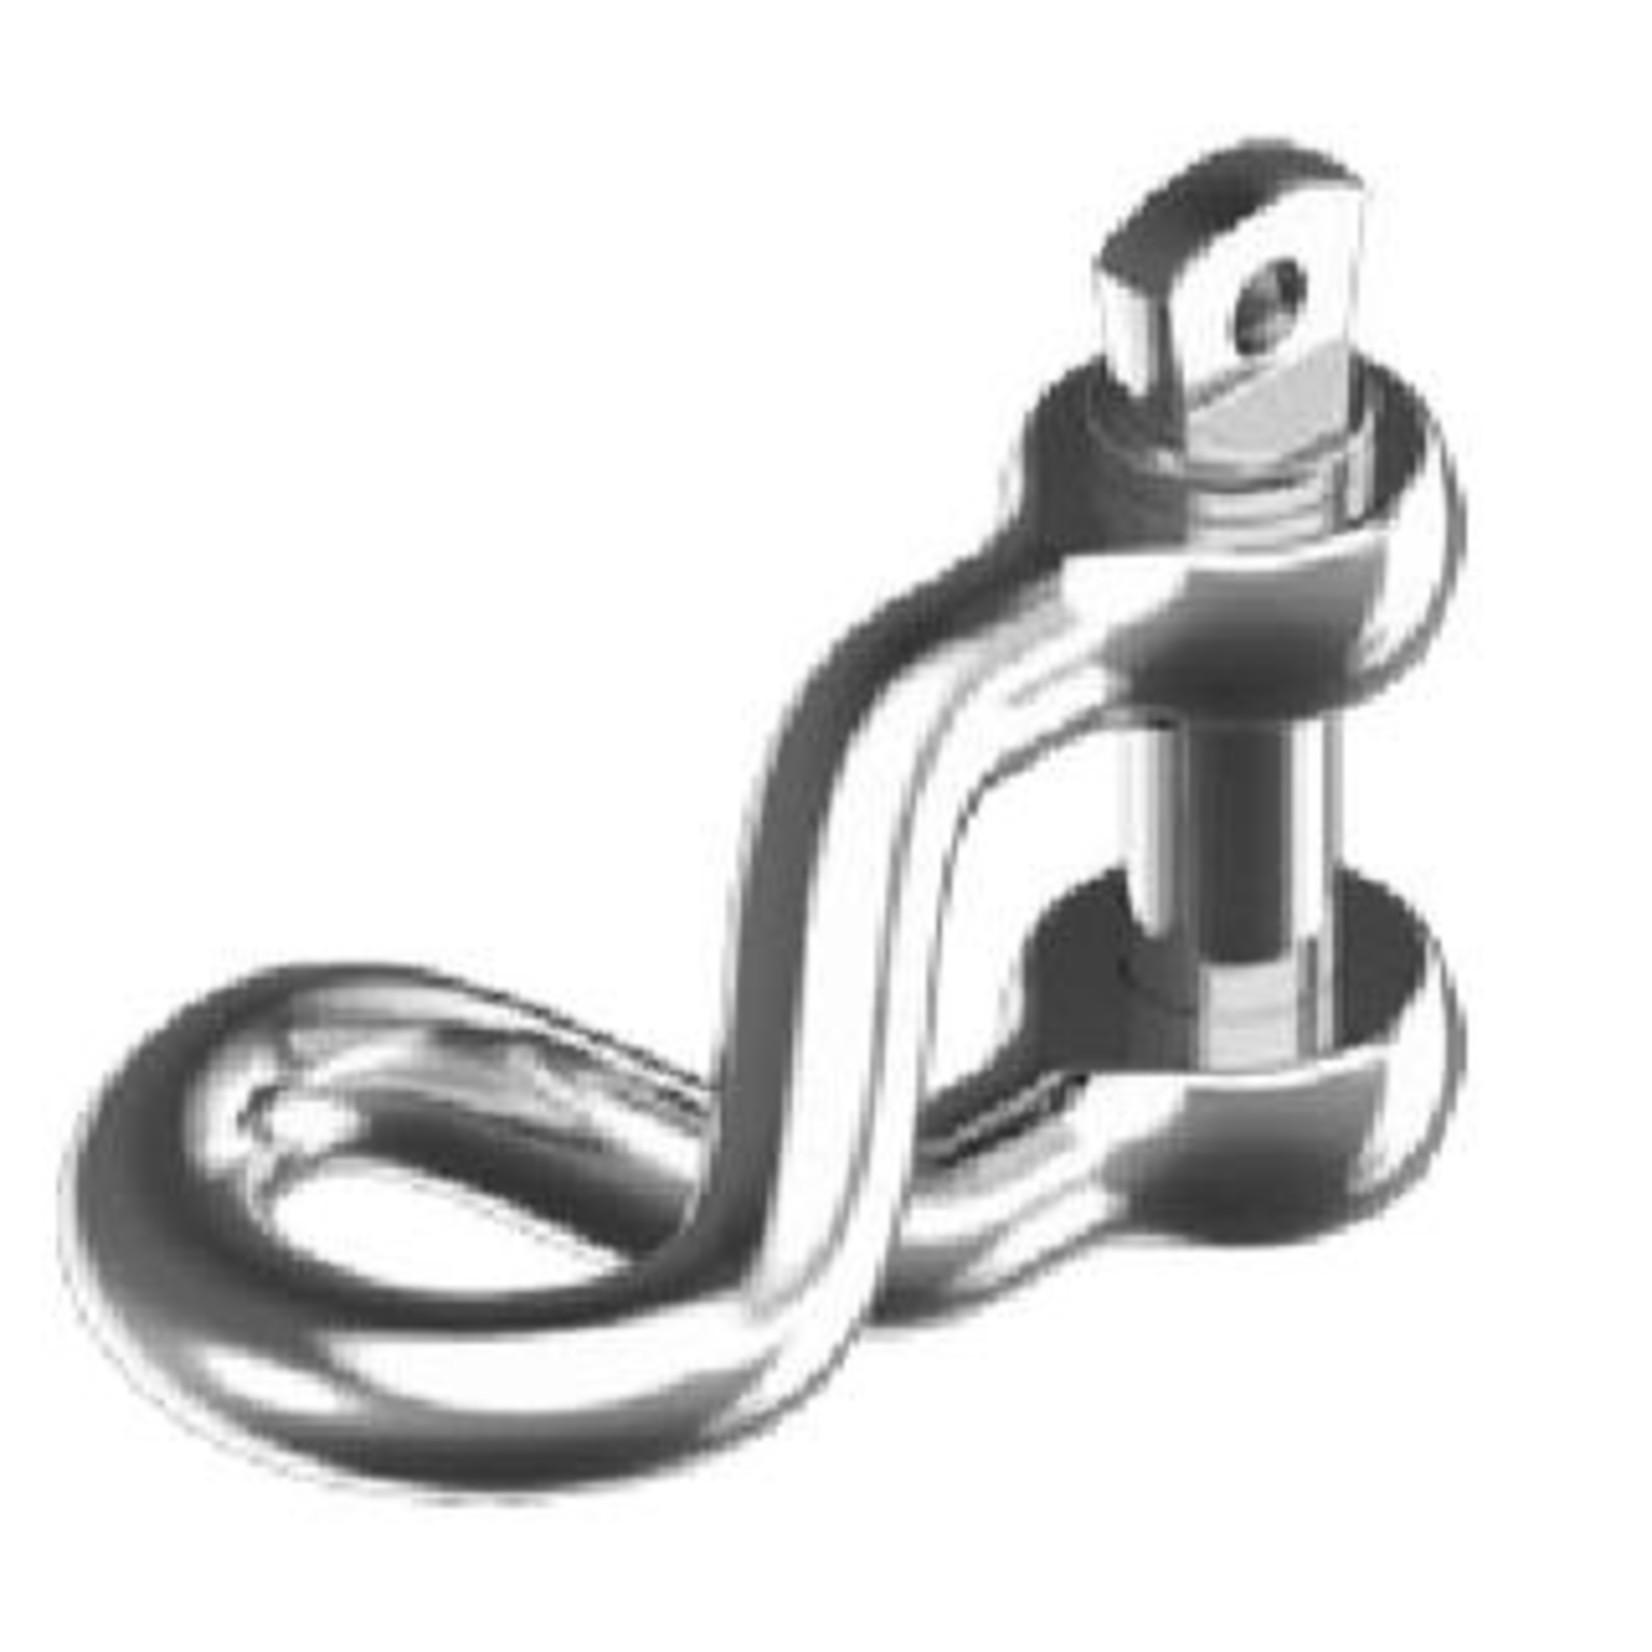 Stainless twisted shackle 12mm